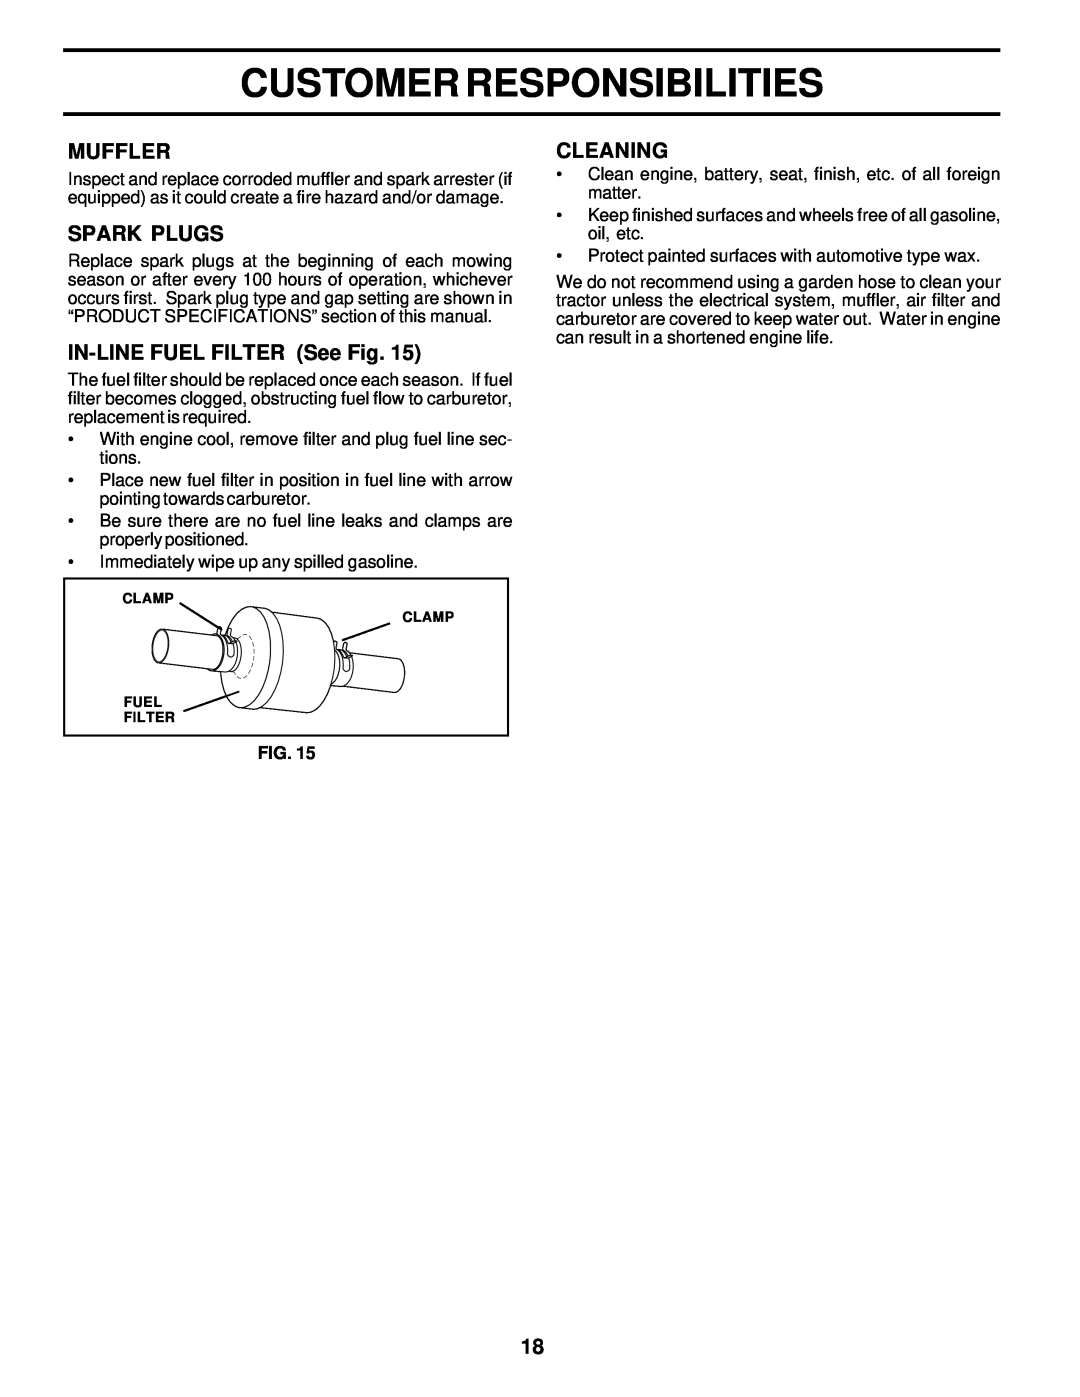 Poulan 176851 owner manual Muffler, Spark Plugs, IN-LINE FUEL FILTER See Fig, Cleaning, Customer Responsibilities 